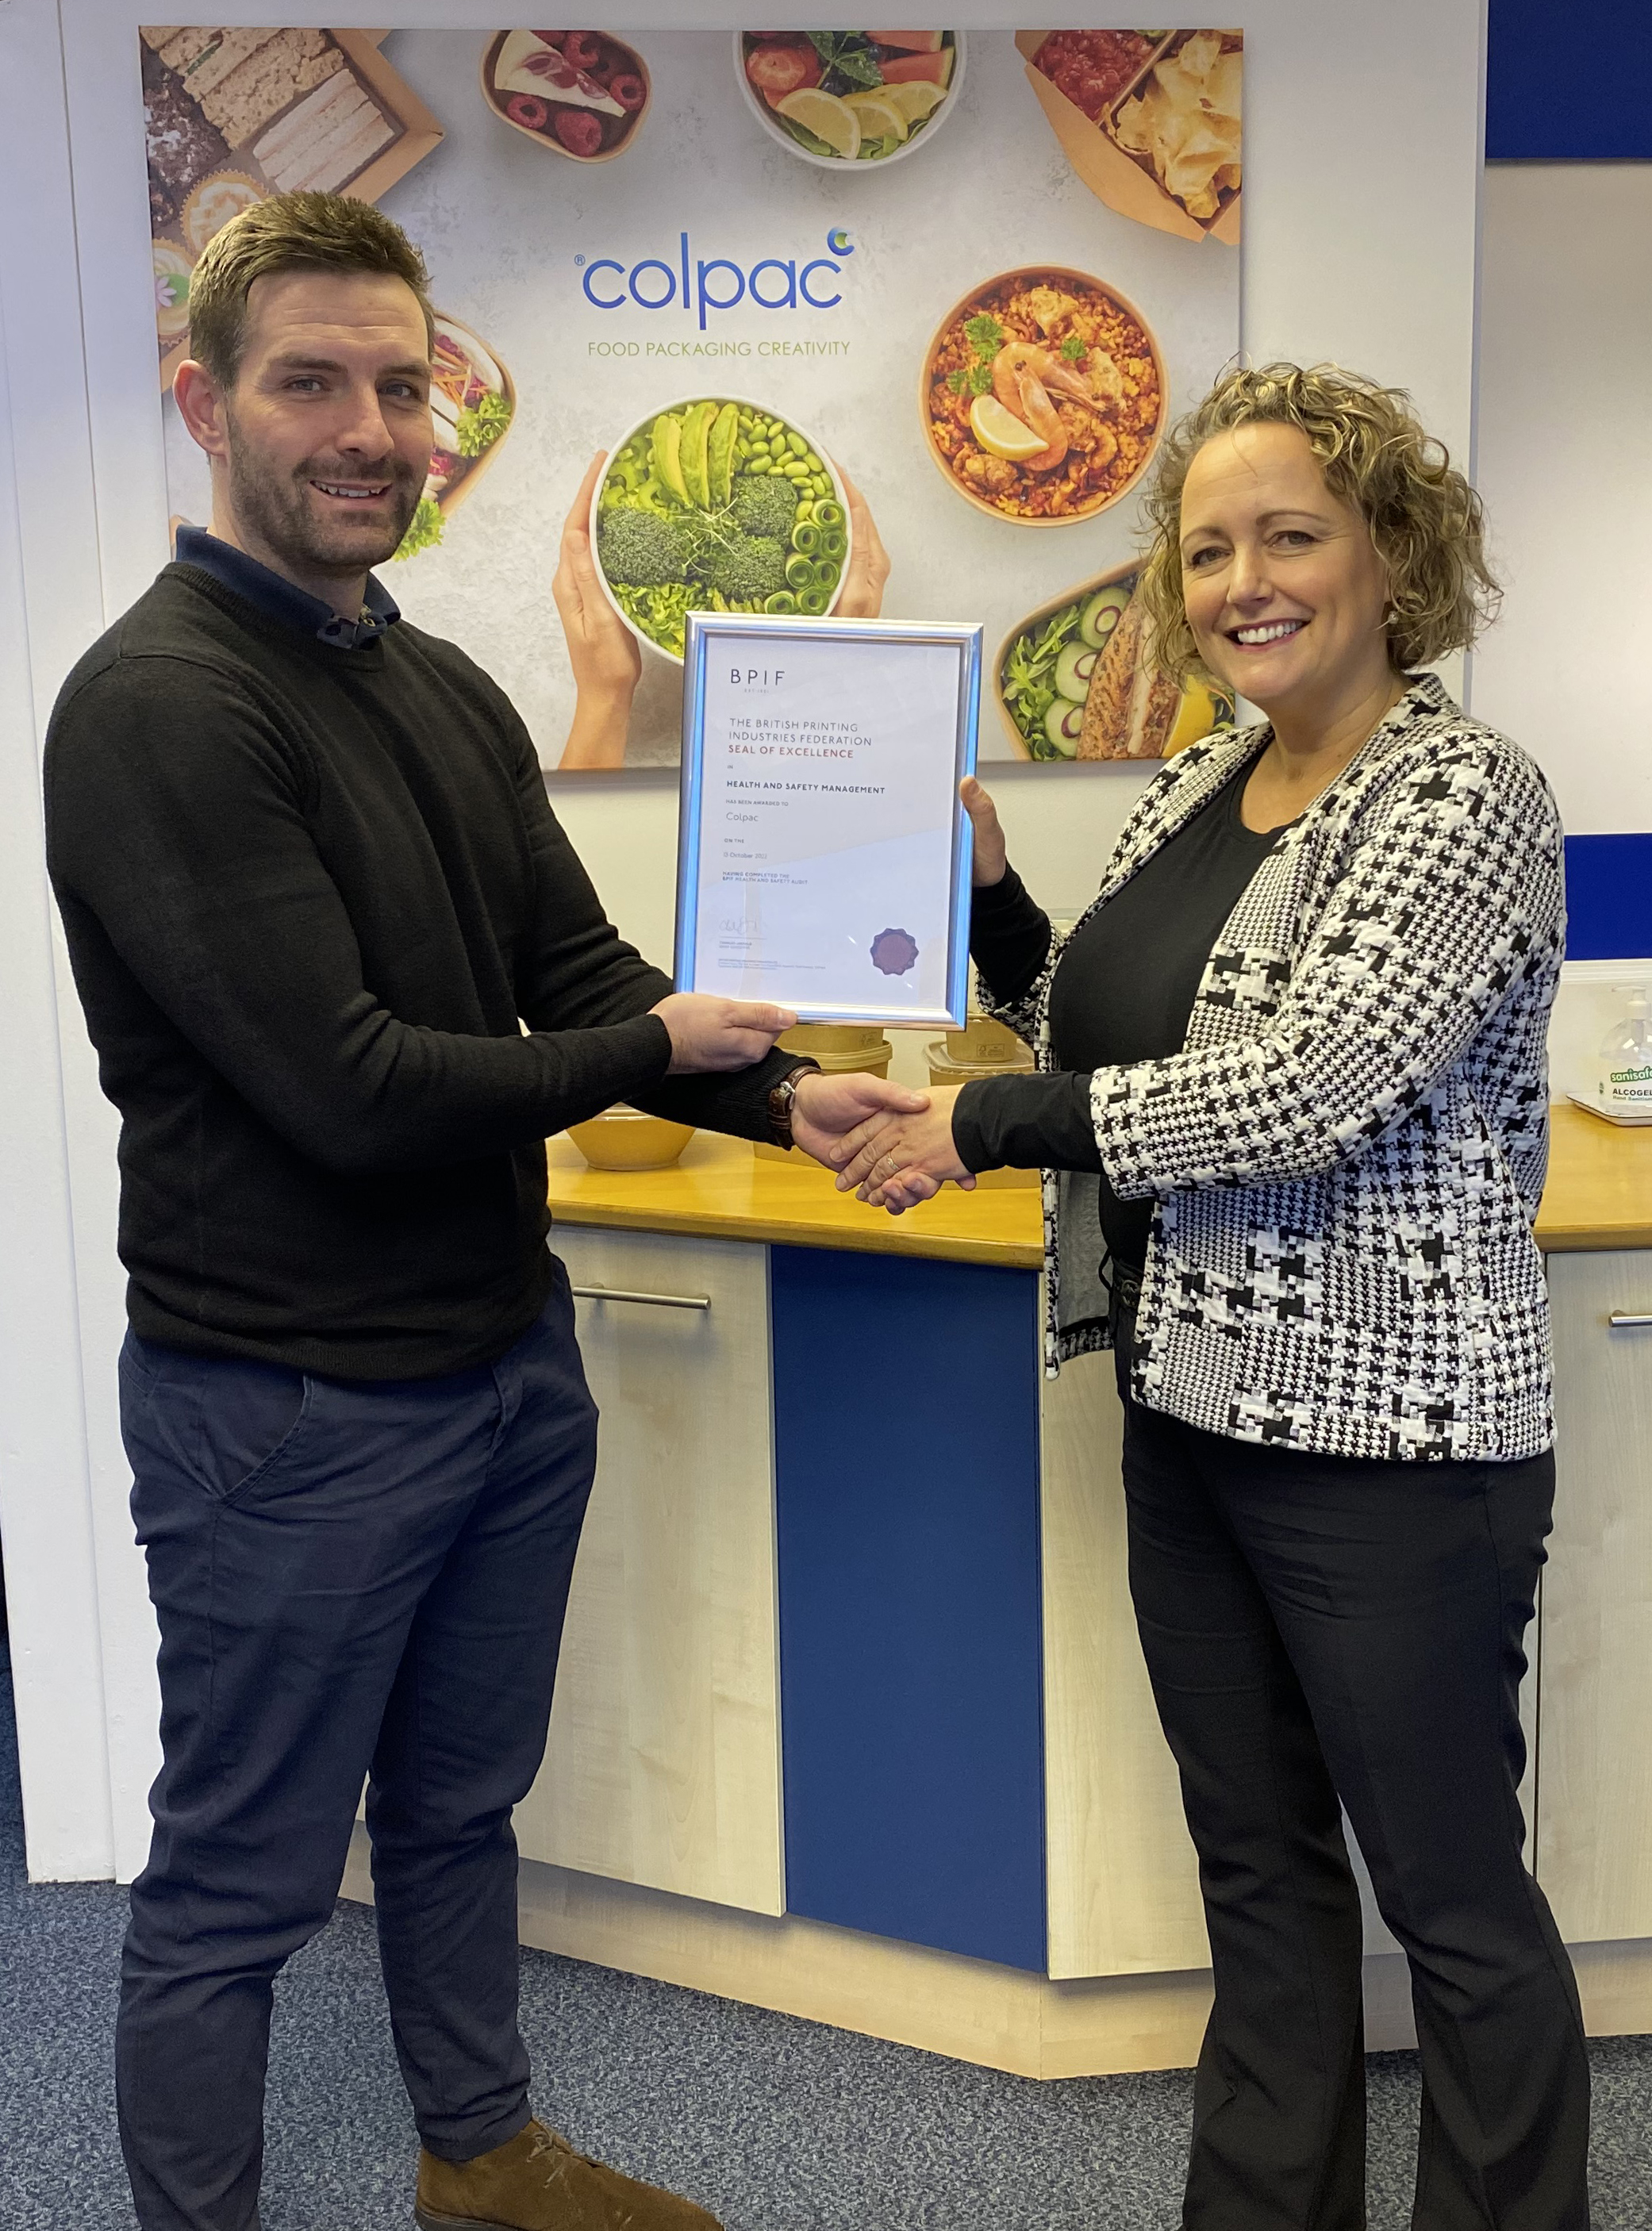 Colpac Awarded Health and Safety Seal of Excellence from the BPIF